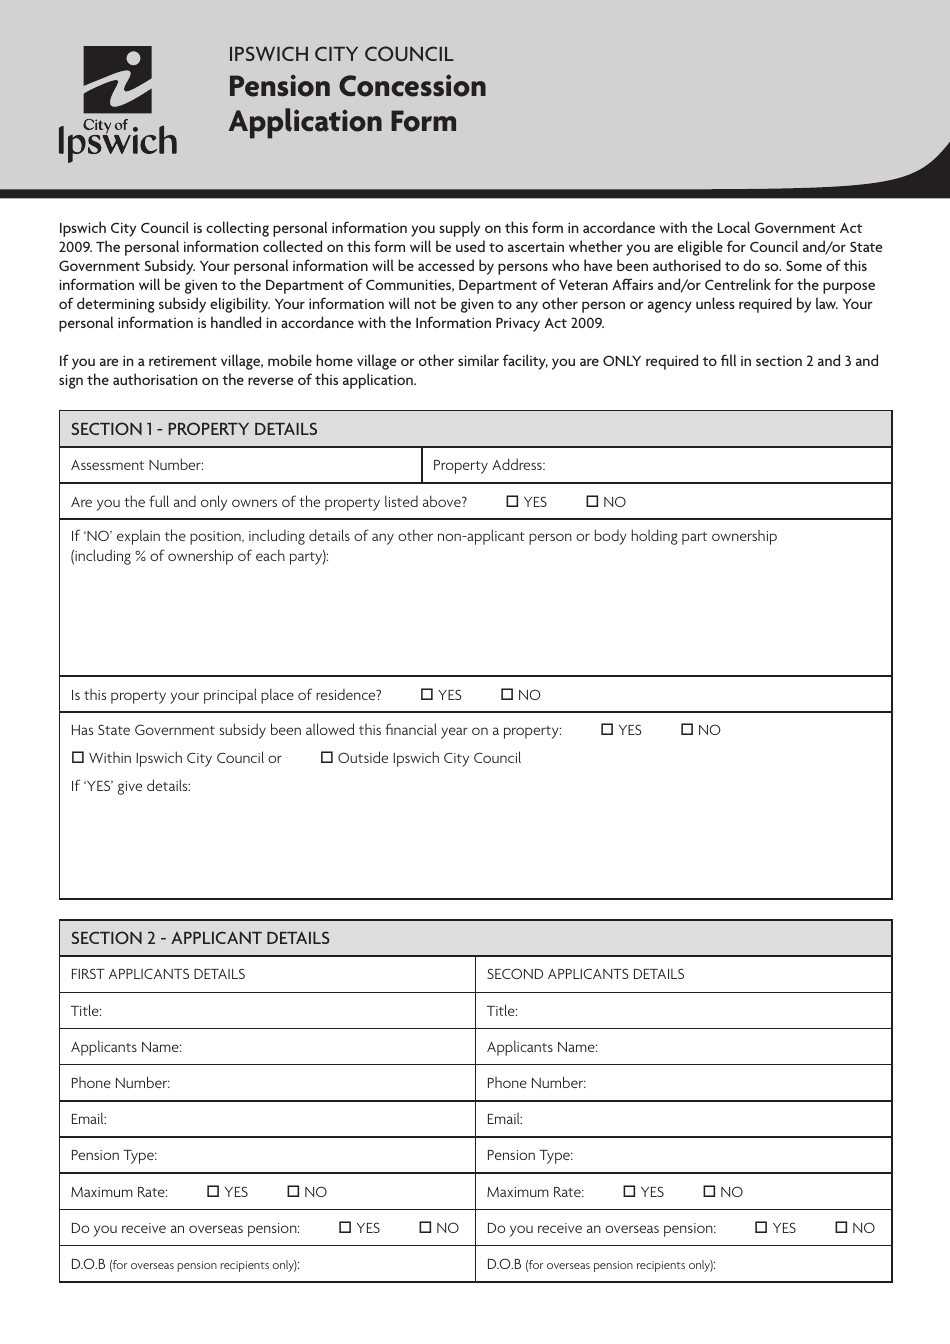 Pension Concession Application Form - City of Ipswich, Queensland, Australia, Page 1